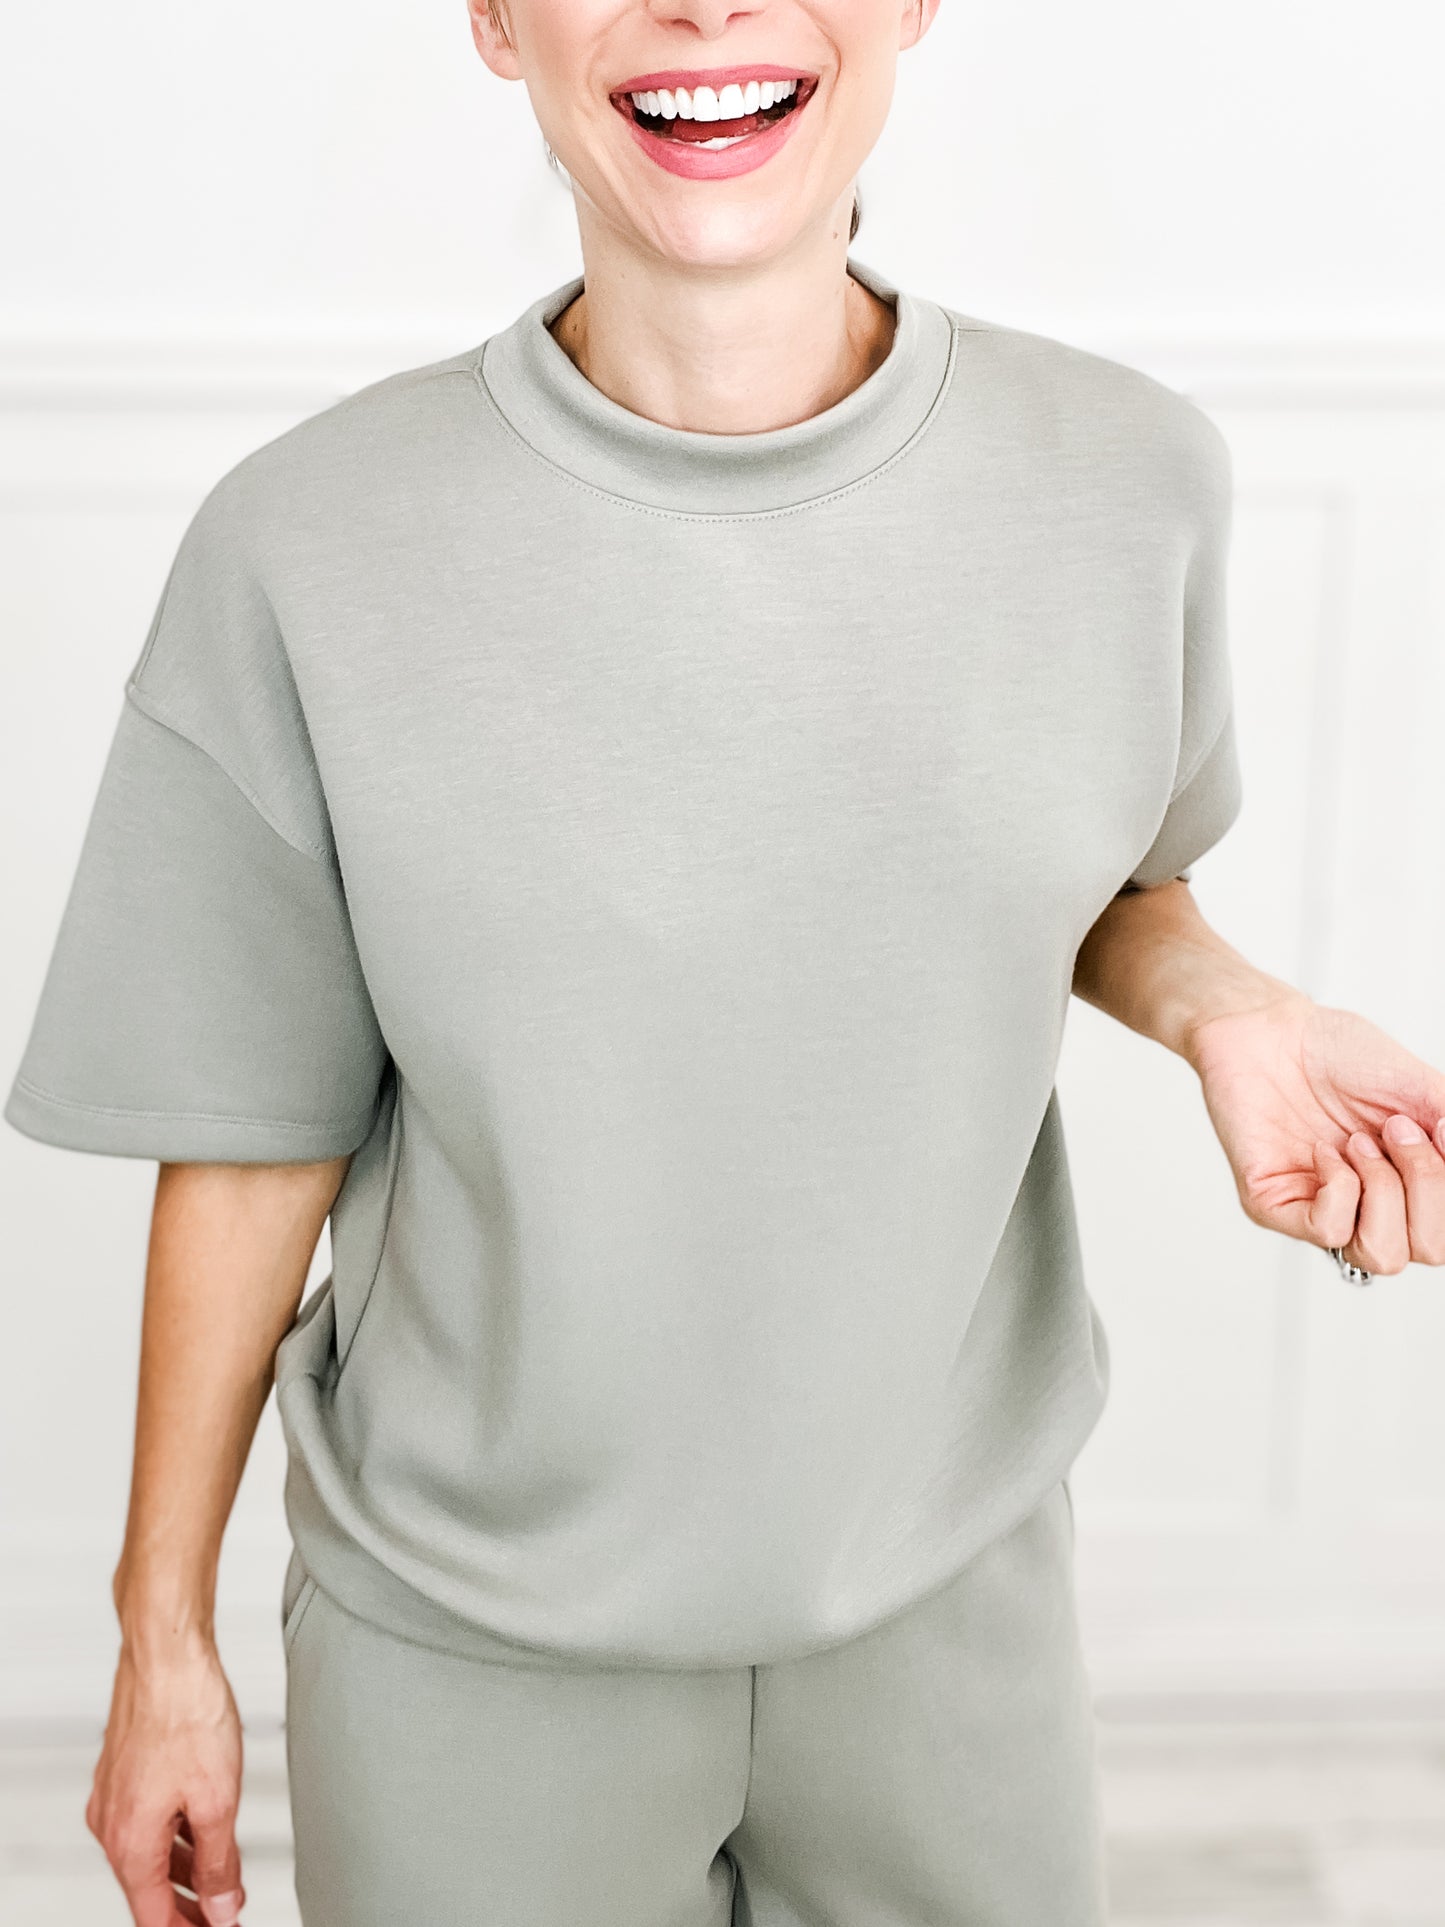 Ready Or Not Modal Poly Span Mock Neck Top - Group B